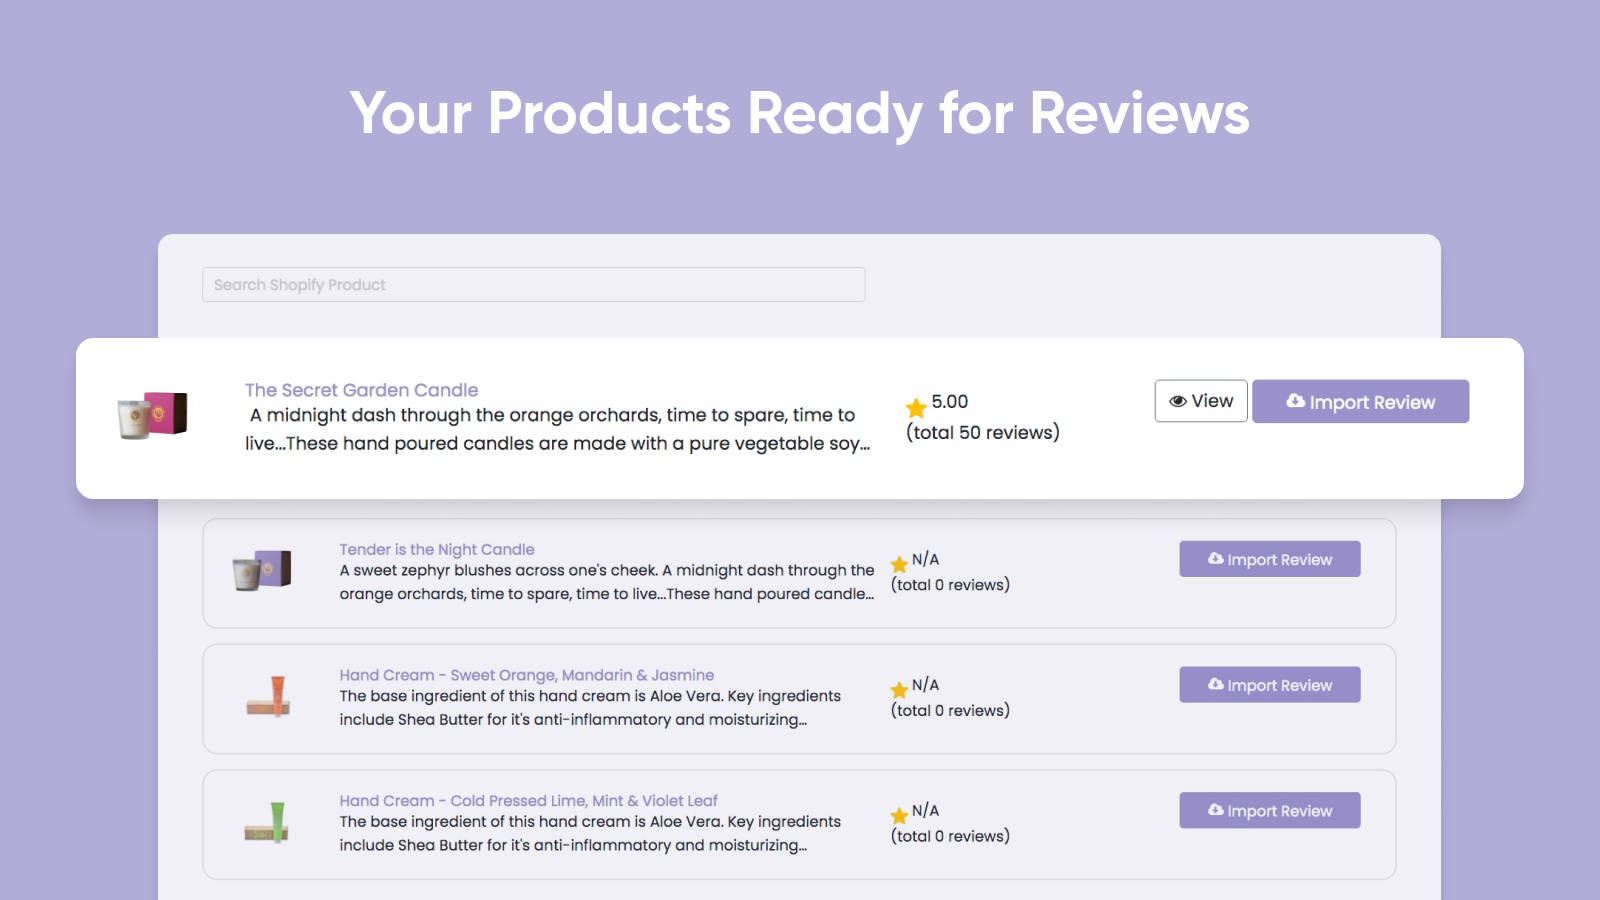 Your Products Ready for Reviews